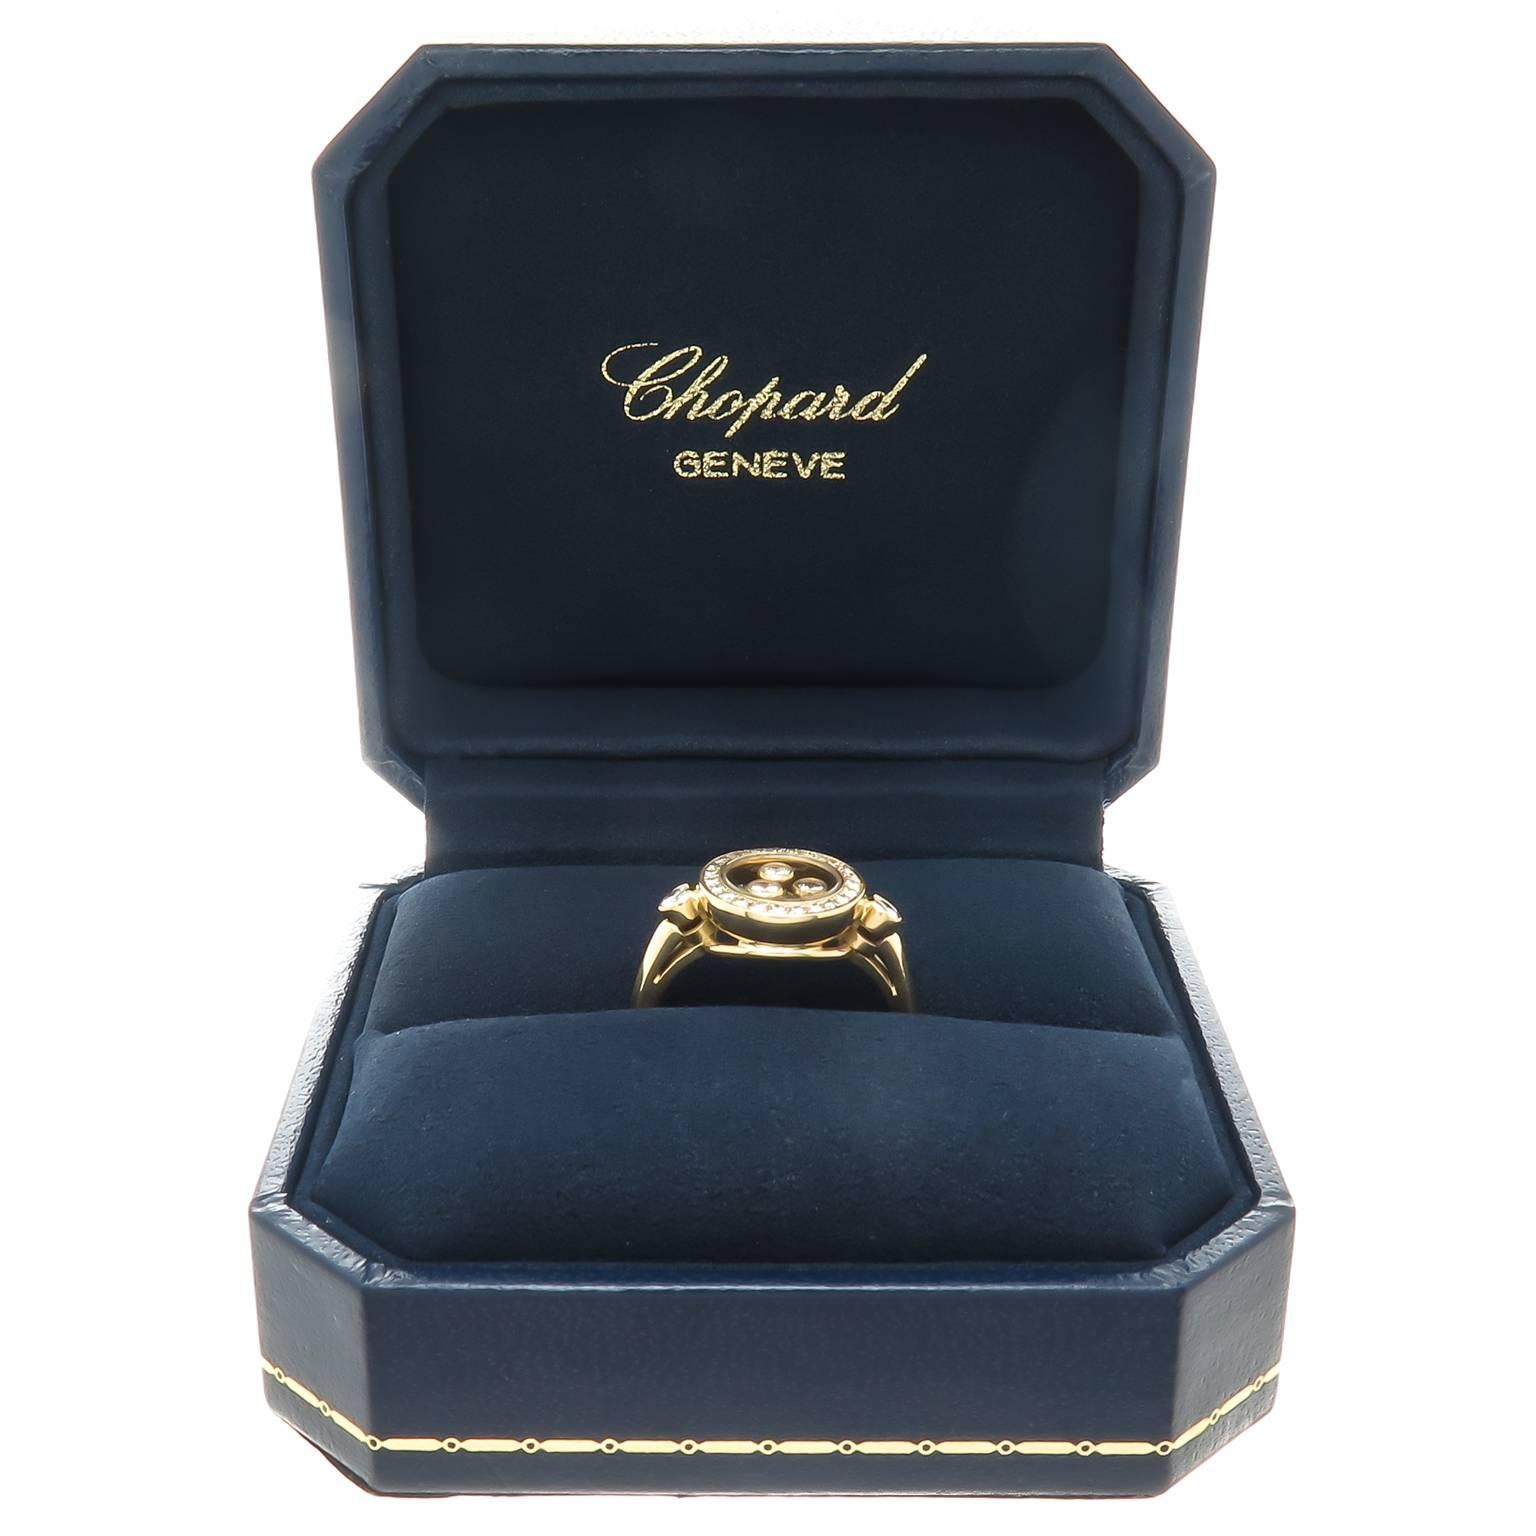 Circa 2005 Chopard 18K Yellow Gold Happy Diamond Ring, measuring 7/16 inch in diameter and having a bezel set with Round Brilliant cut Diamonds totaling 1/4 carat and Three floating Diamonds totaling .15 Carat. Finger size = 6 1/2. Comes in Chopard